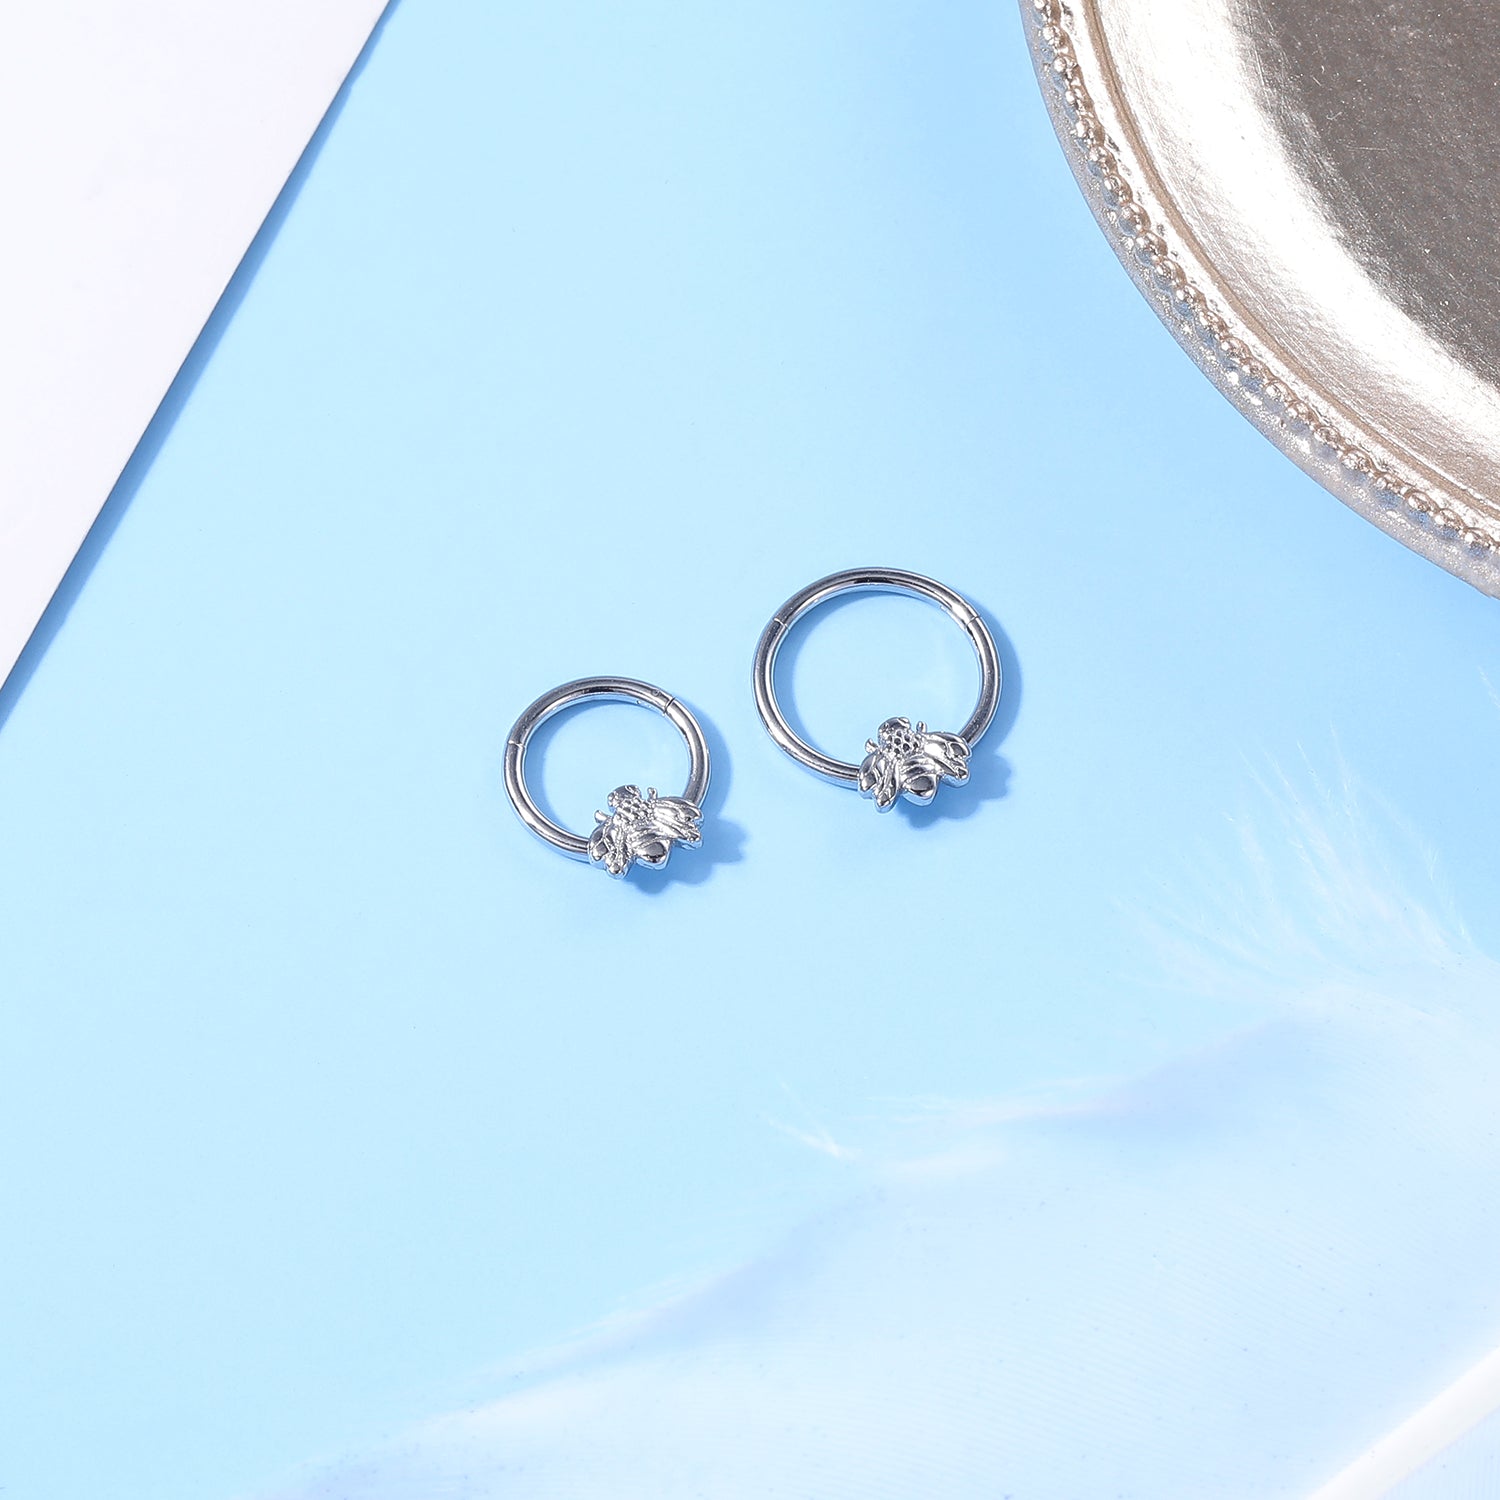 16g-nose-septum-clicker-ring-bee-cartilage-helix-piercing